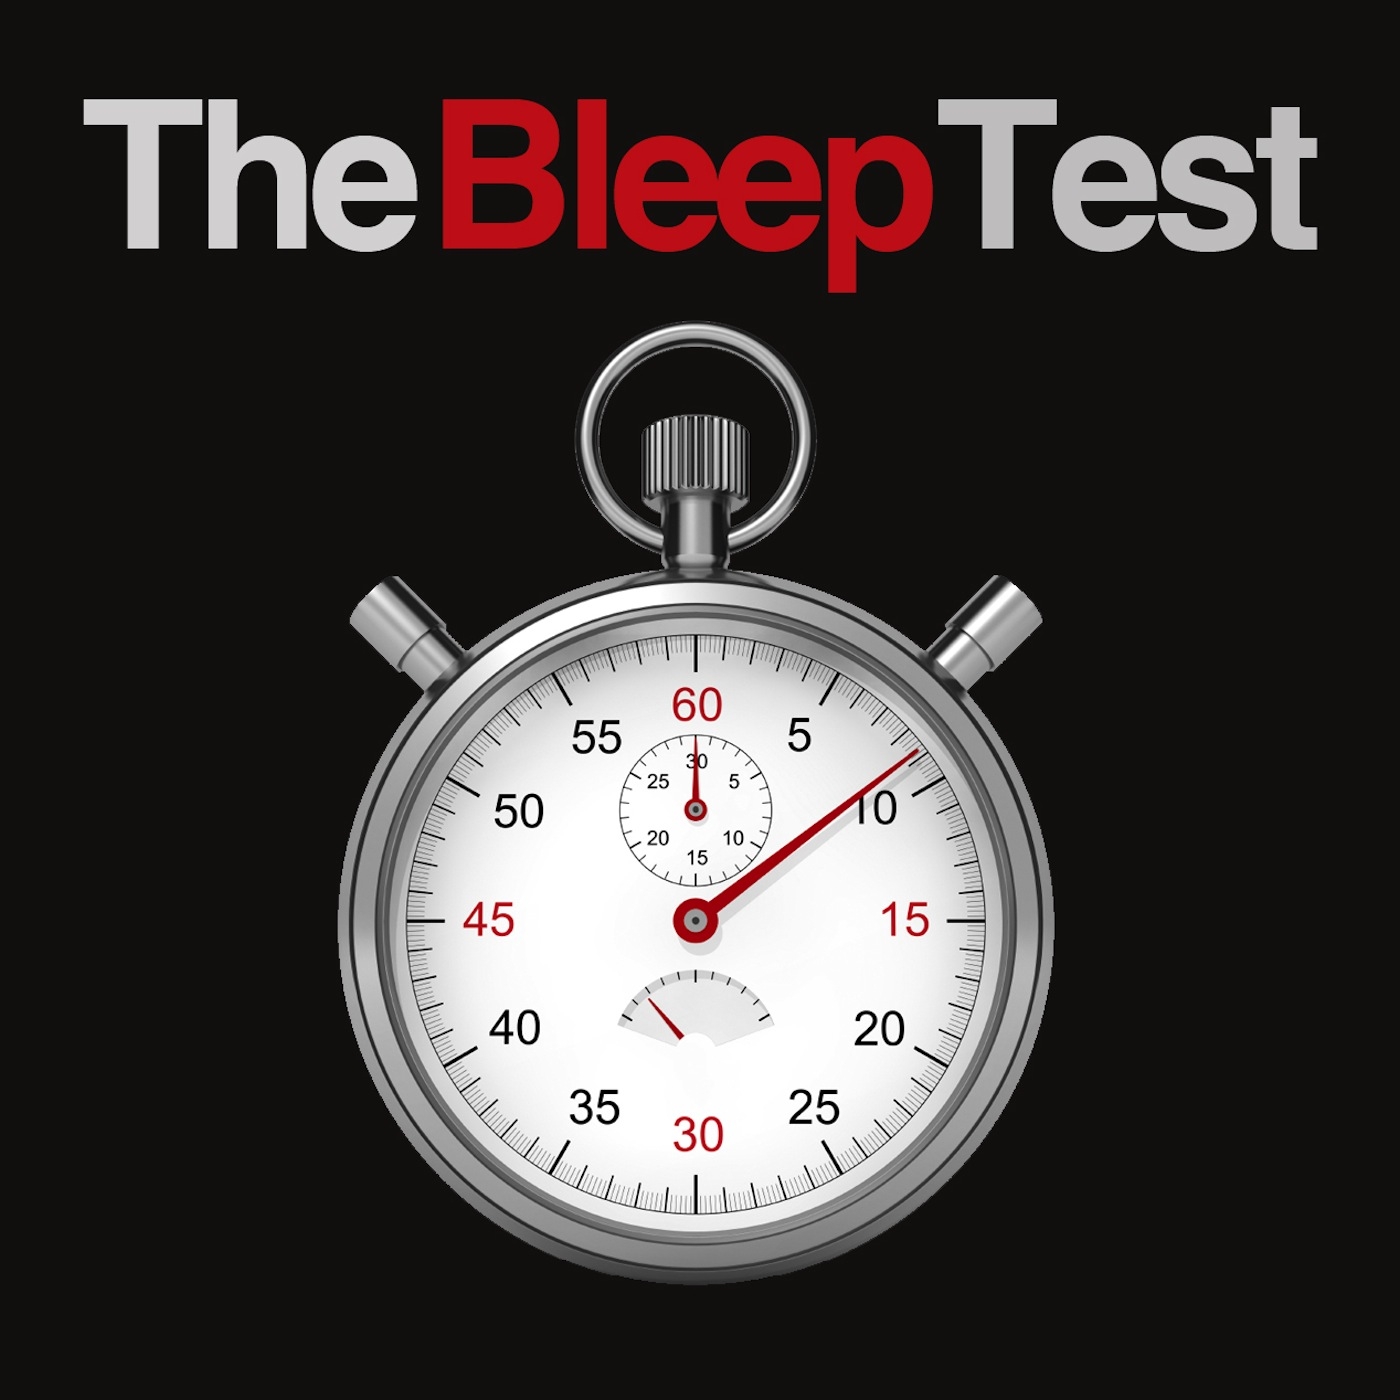 The Bleep Test: The Best 20 Metre and 15 Metre Beep Test for Personal Fitness & Recruitment Practice to the Police, RAF, Army, Fire Brigade Royal Air Force, Royal Navy and the Emergency Services